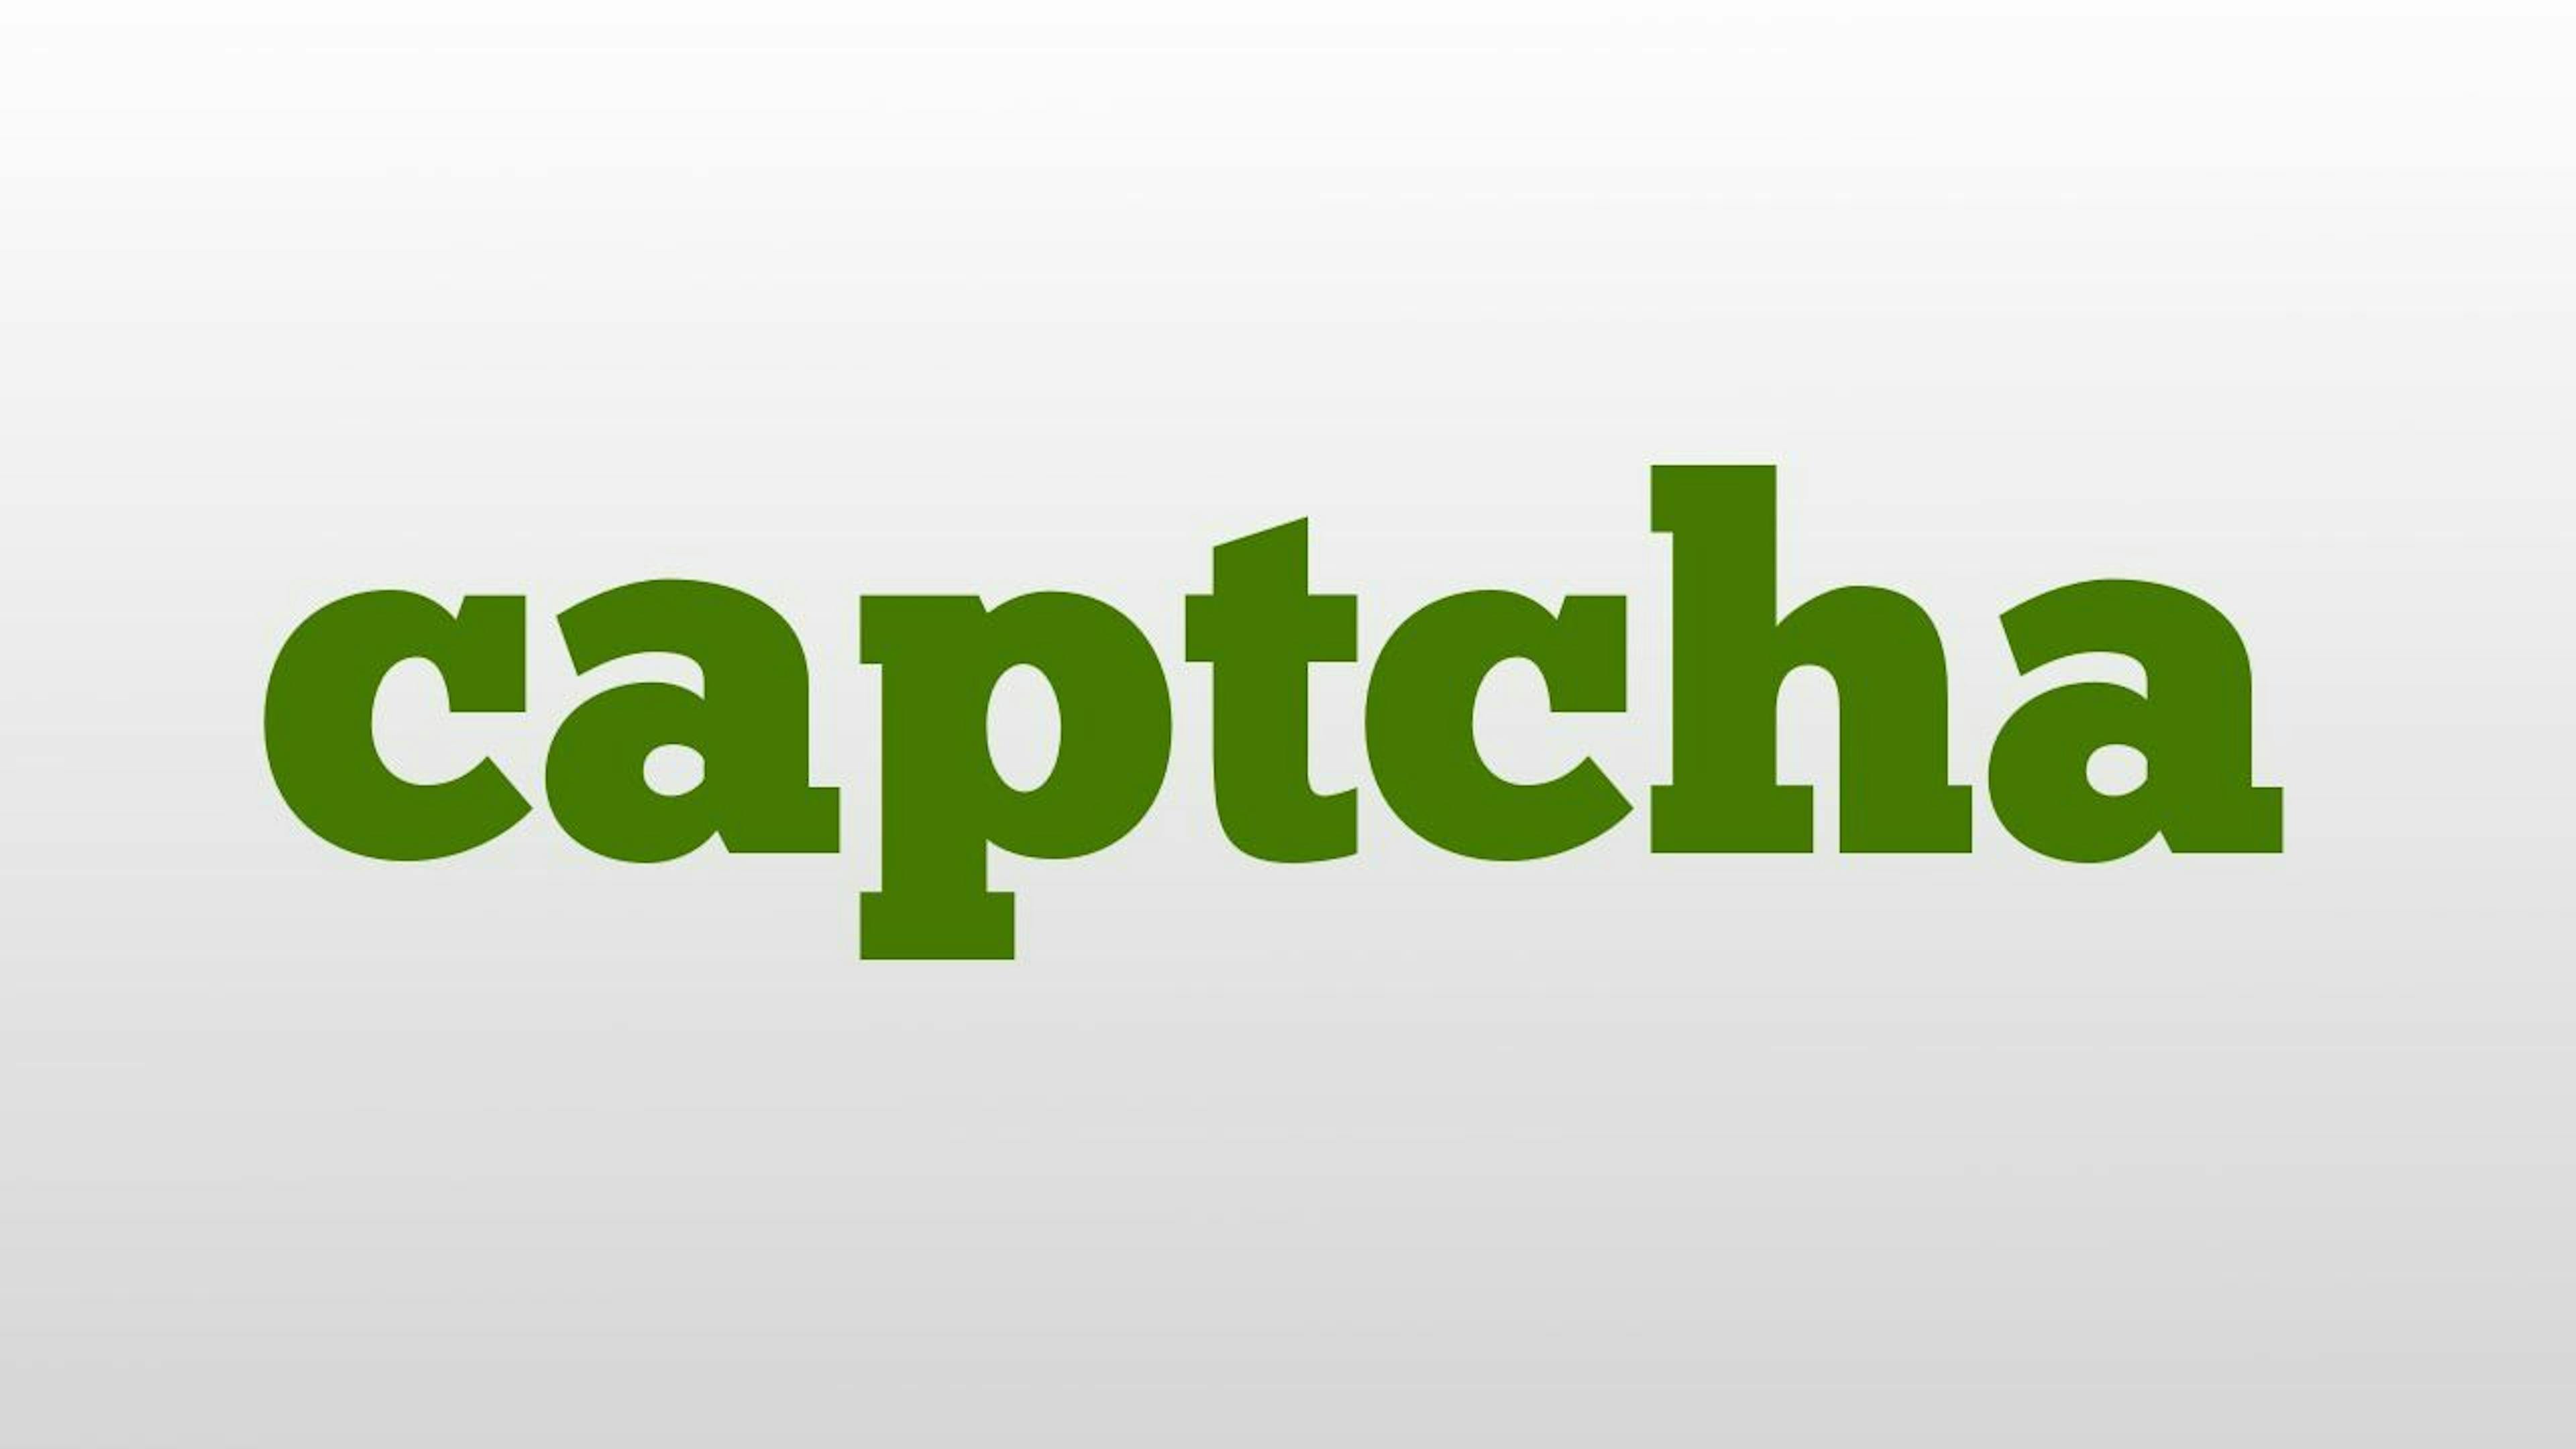 featured image - What is CAPTCHA and Does Google Use it to Train AI?